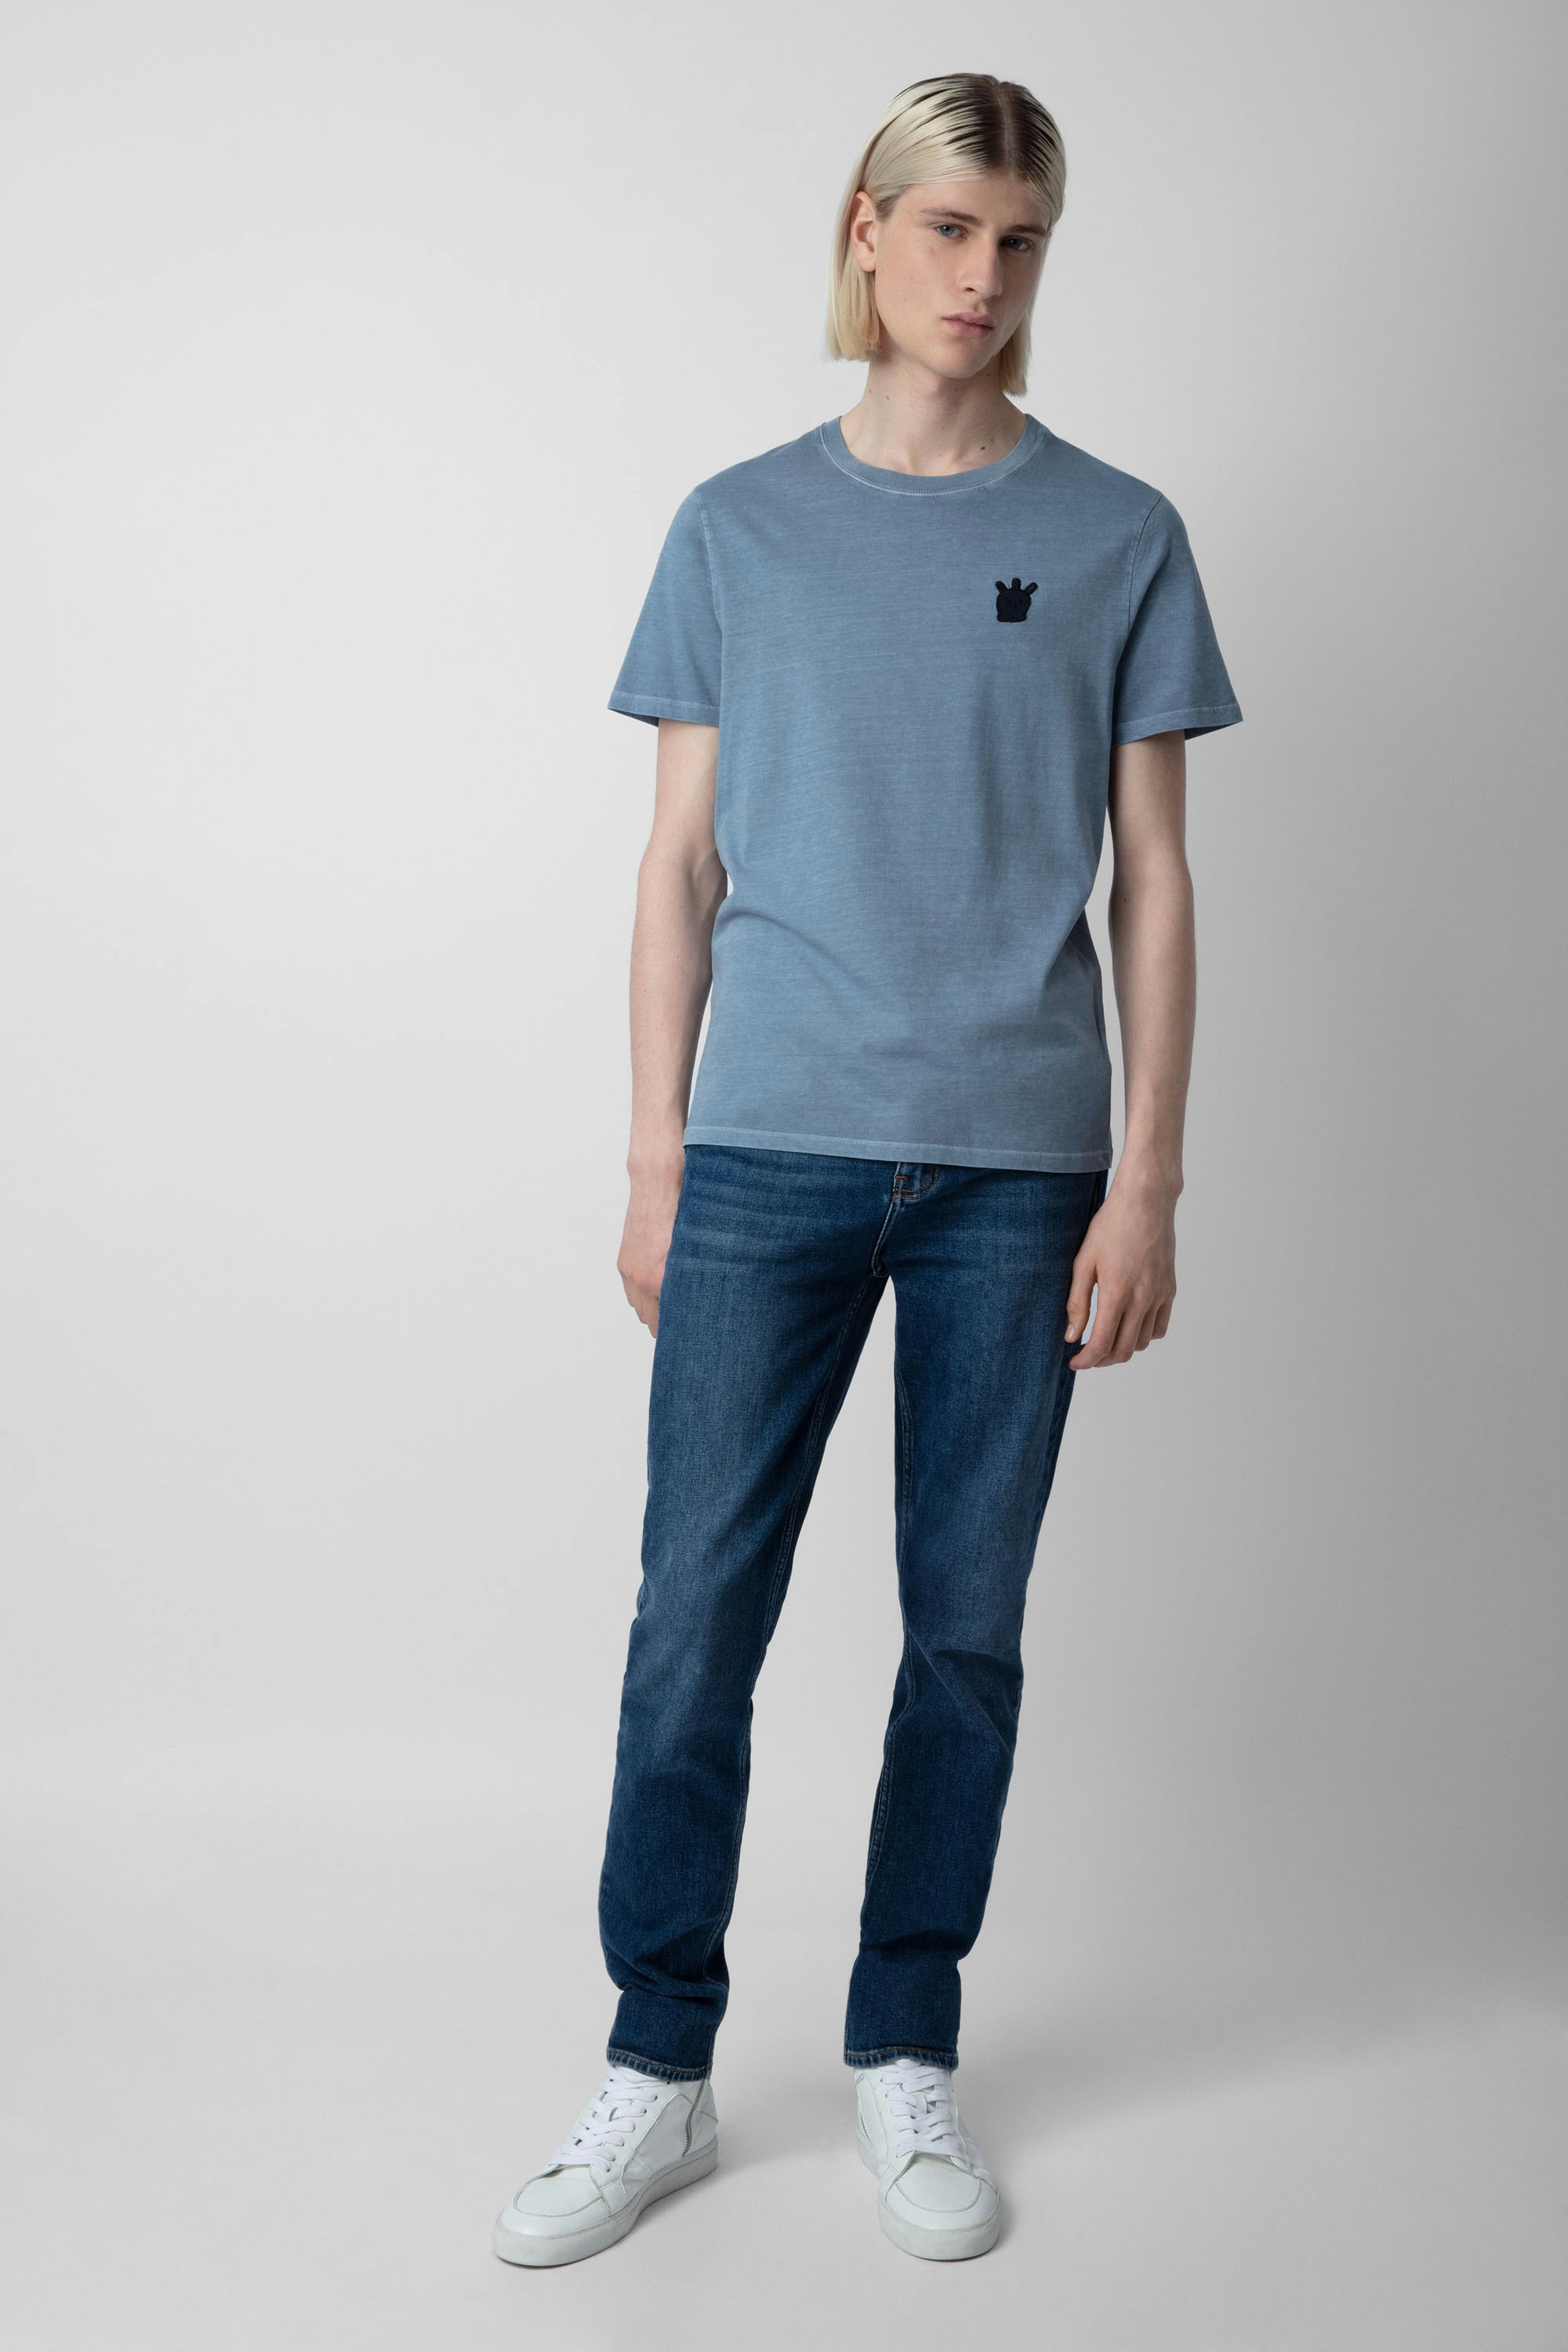 Tommy Skull T-shirt - Men's blue cotton T-shirt featuring a Skull XO patch on the chest.